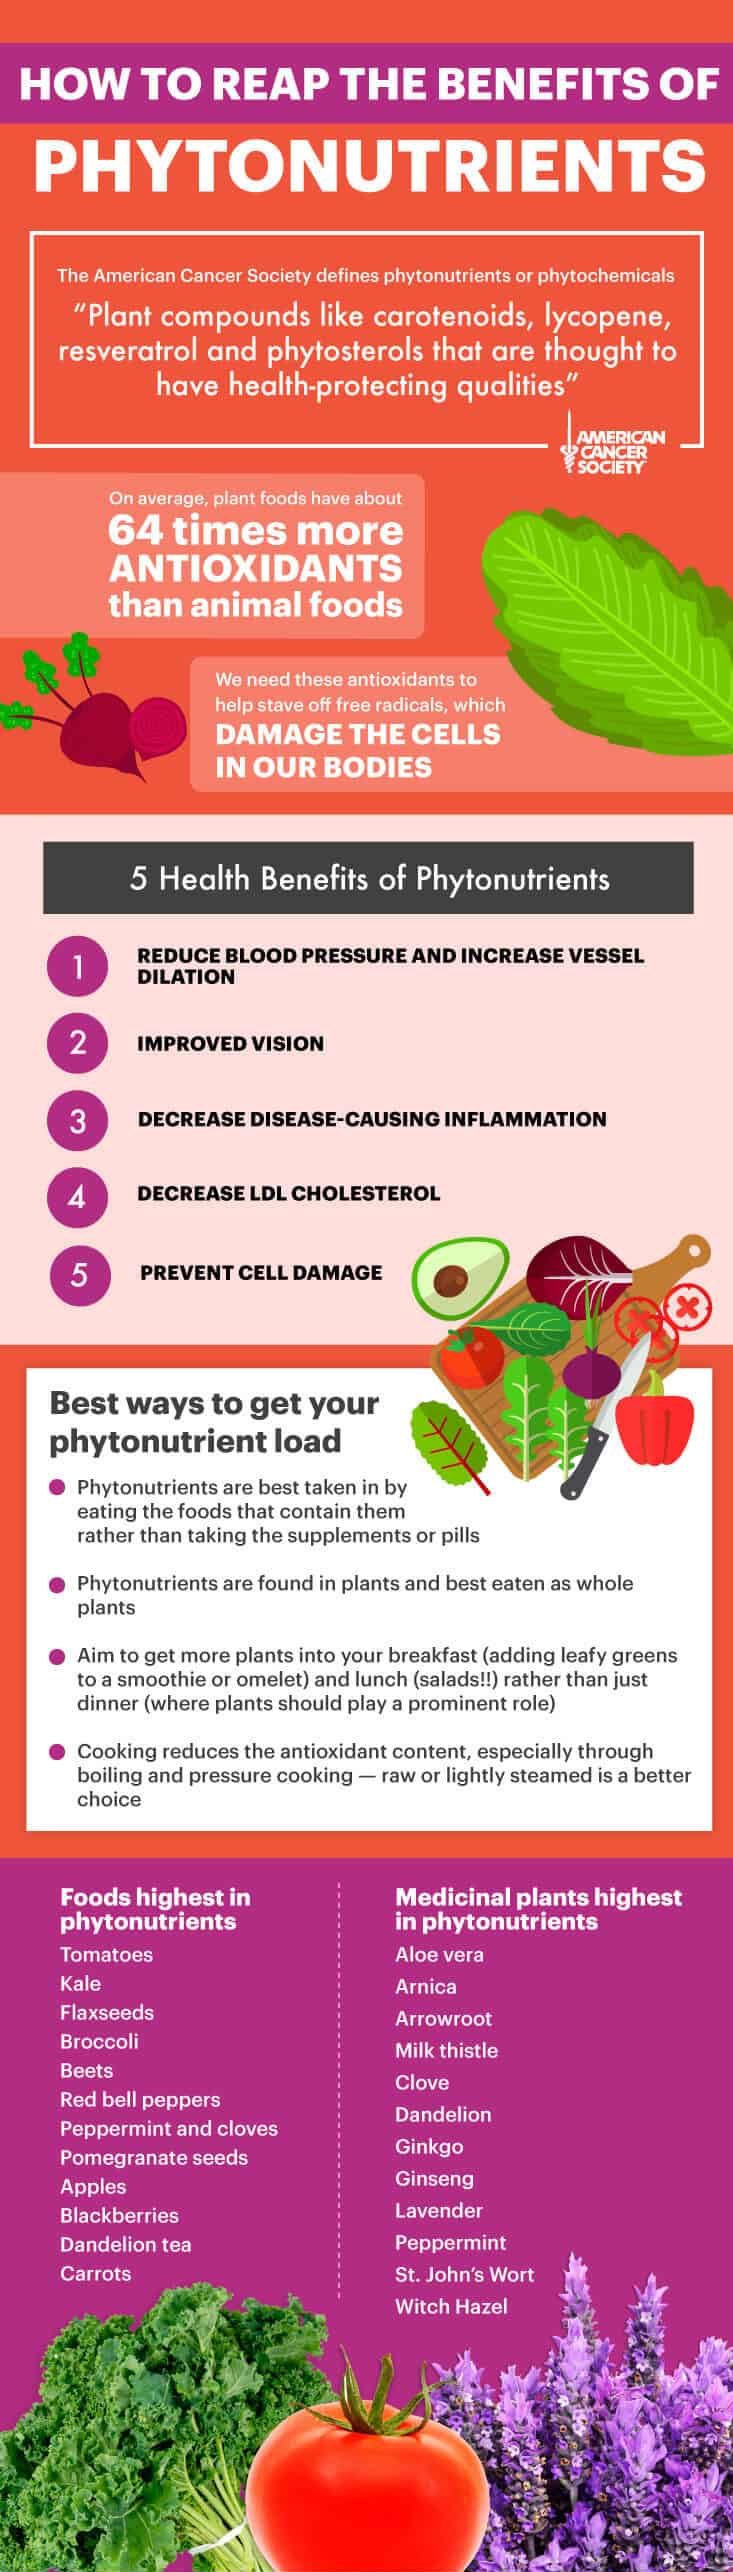 Benefits of phytonutrients - Dr. Axe